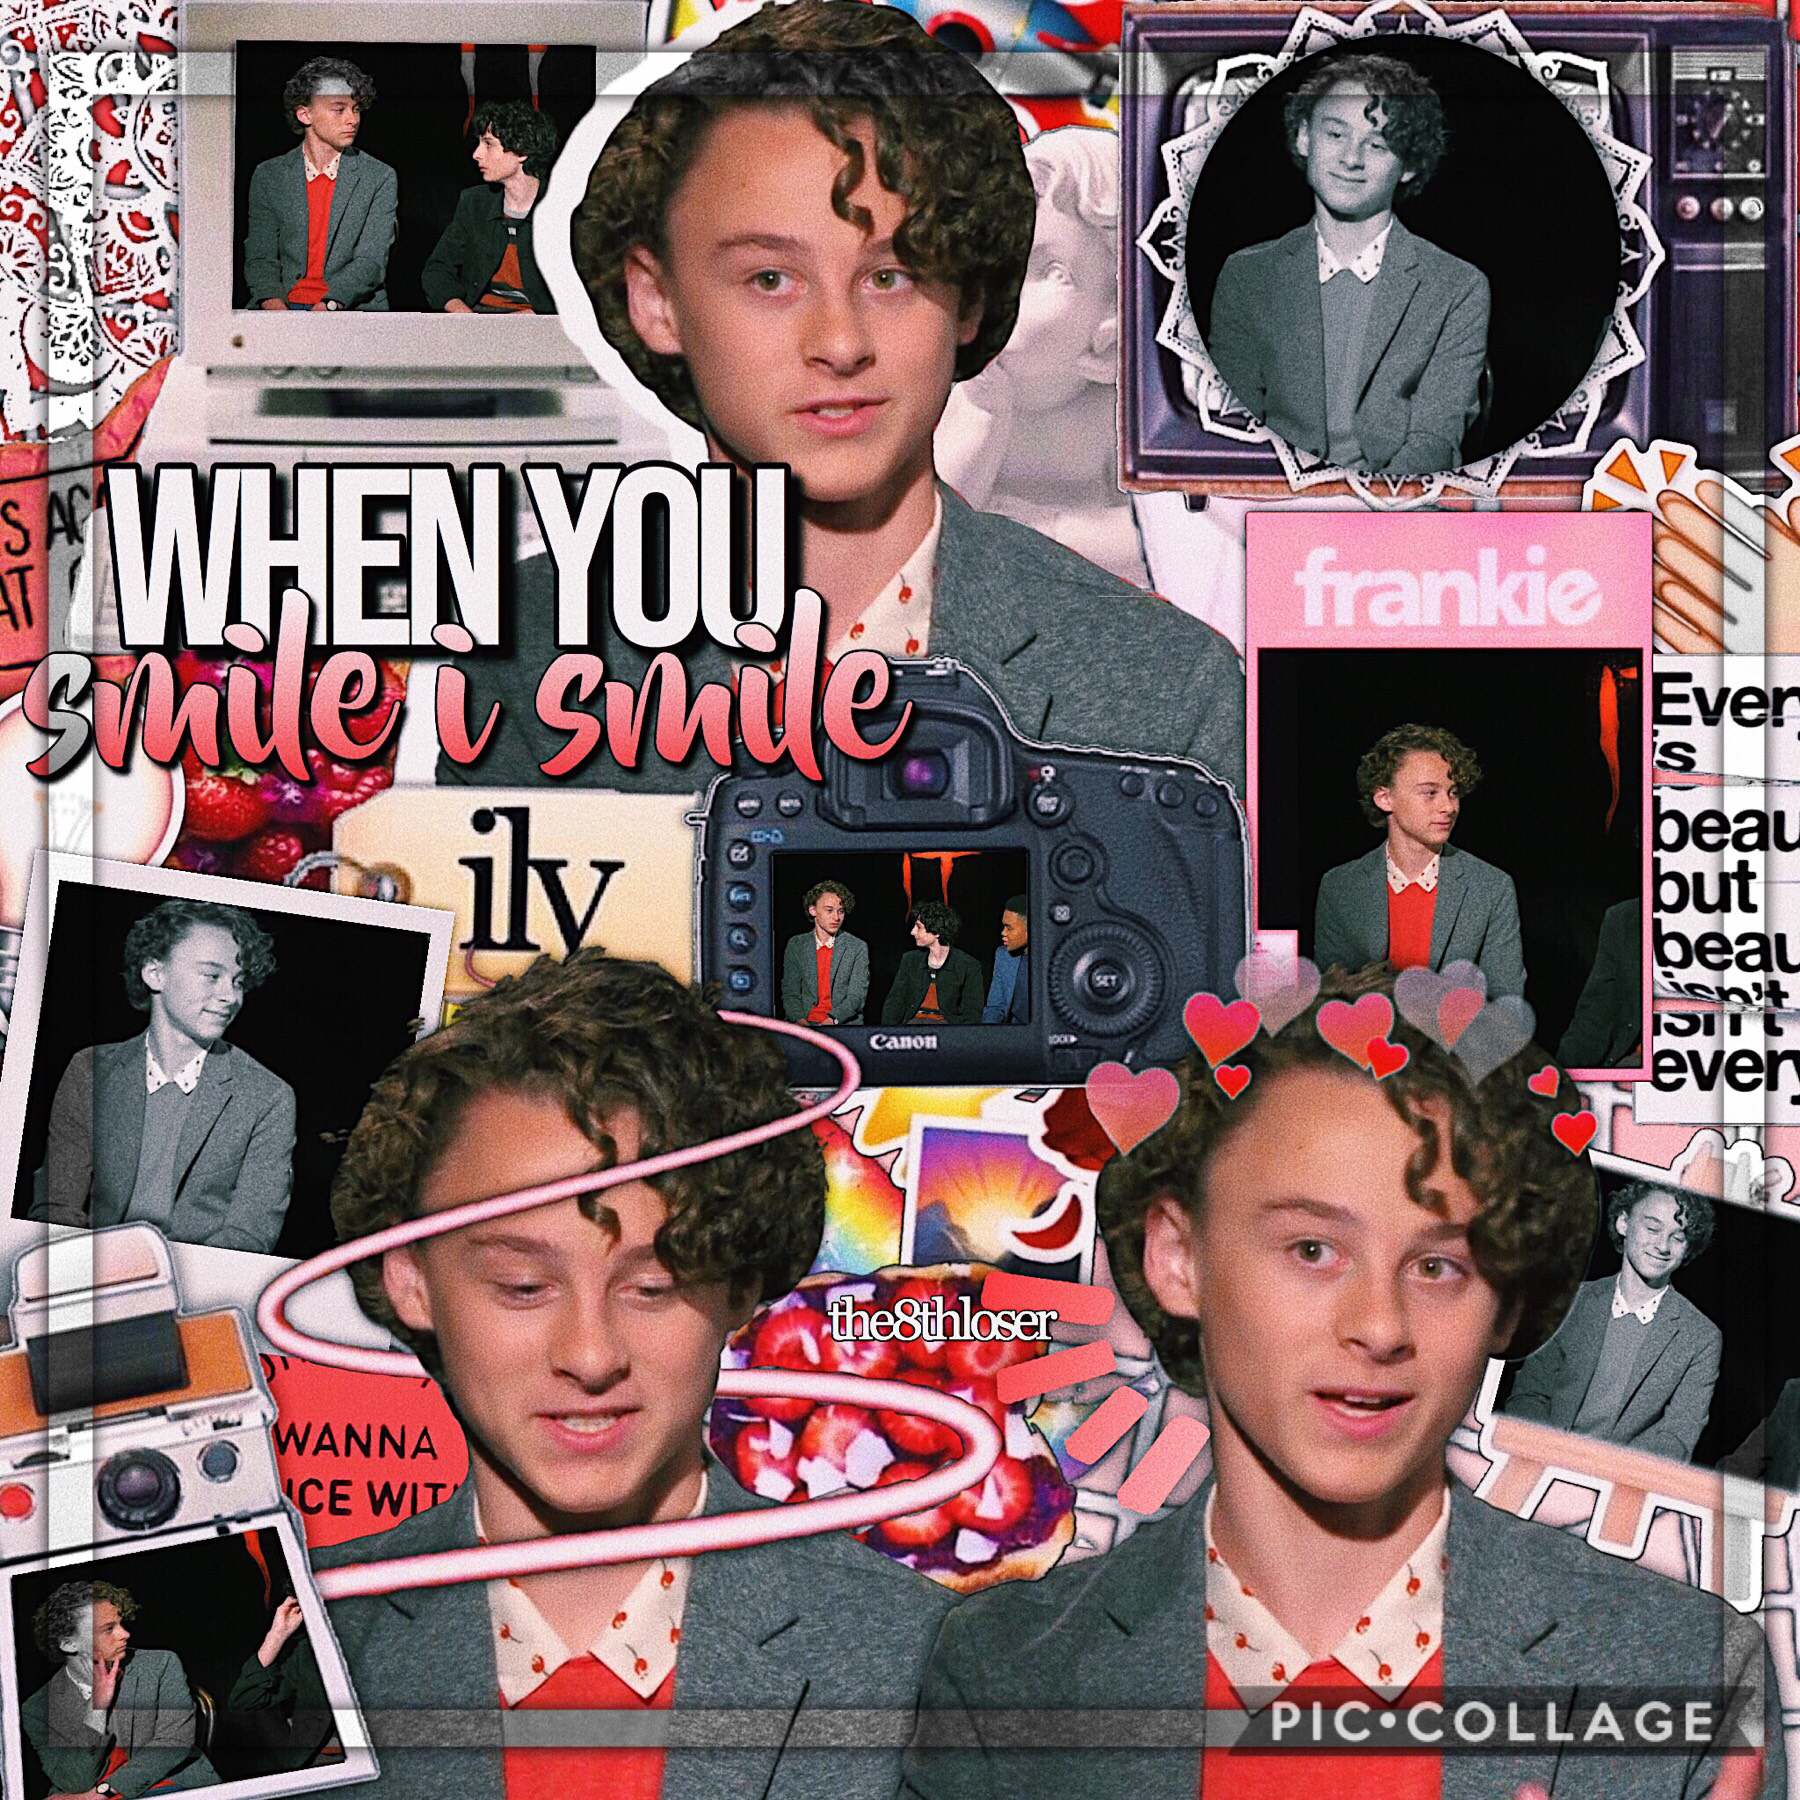 Tap
I just made this and it’s awful rip
I’m more in love with Wyatt than ever rn, ask jewels. He’s just so cute and amazing and ömfg kill me 💓💗💖🤧